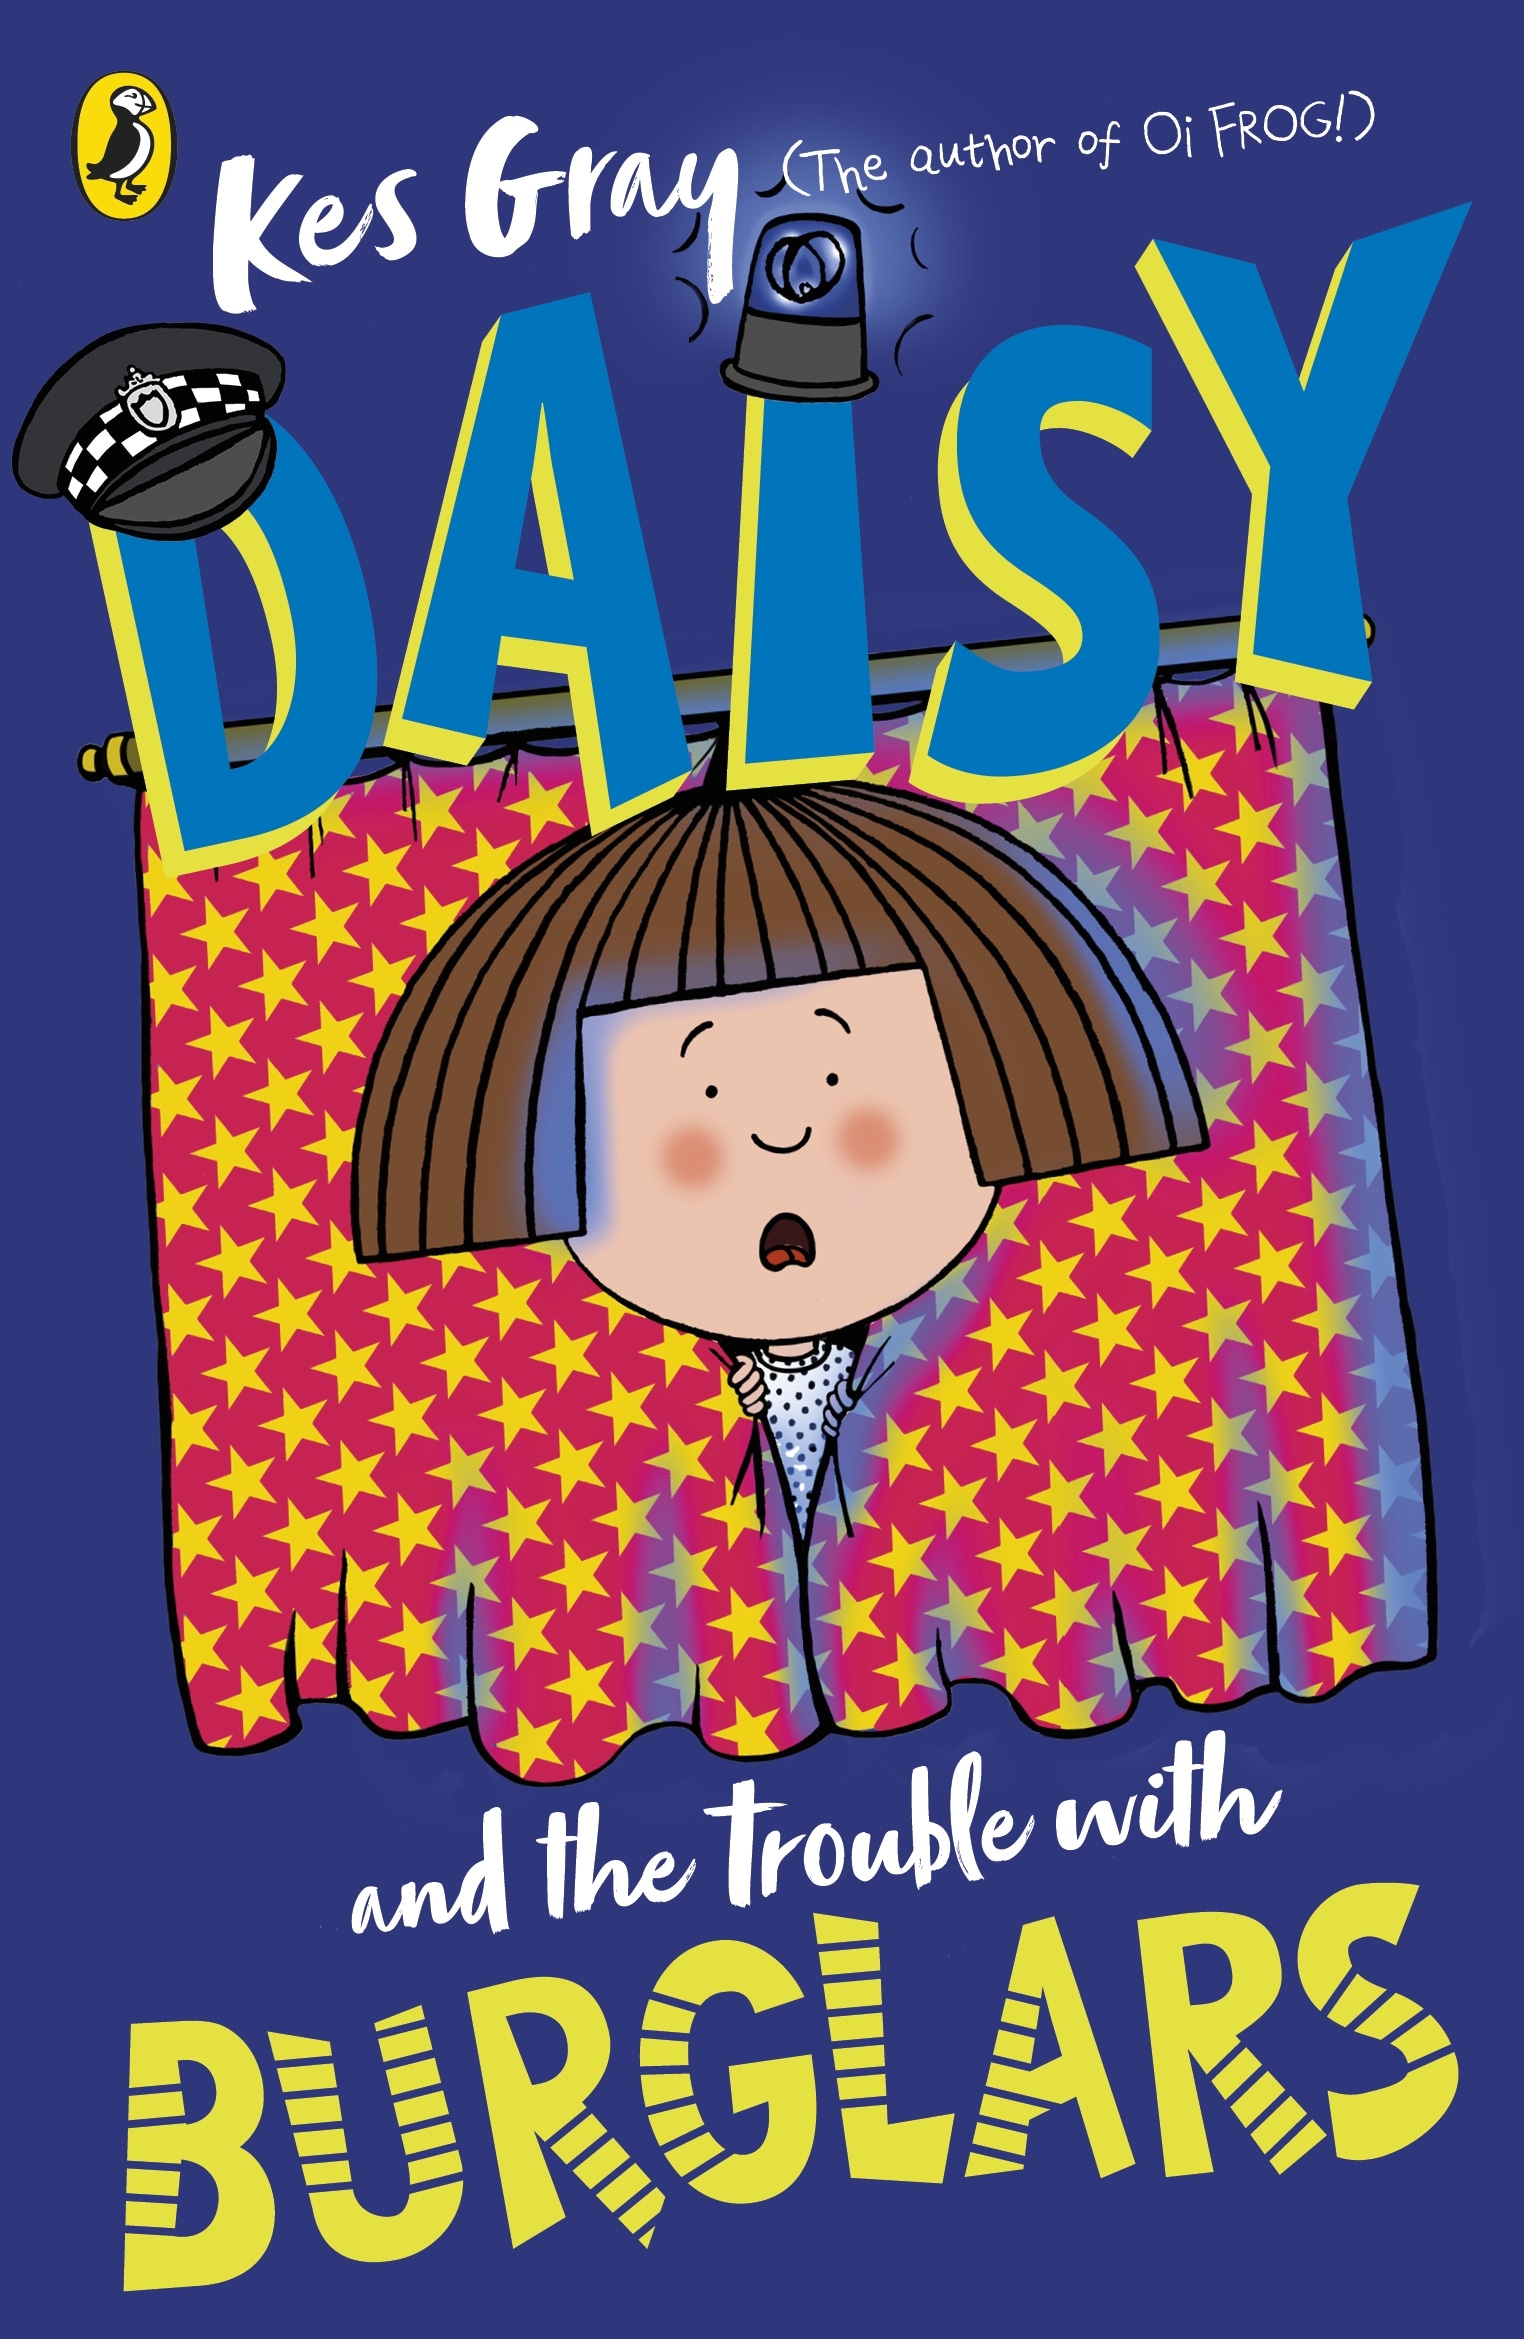 Book “Daisy and the Trouble with Burglars” by Kes Gray — September 17, 2020